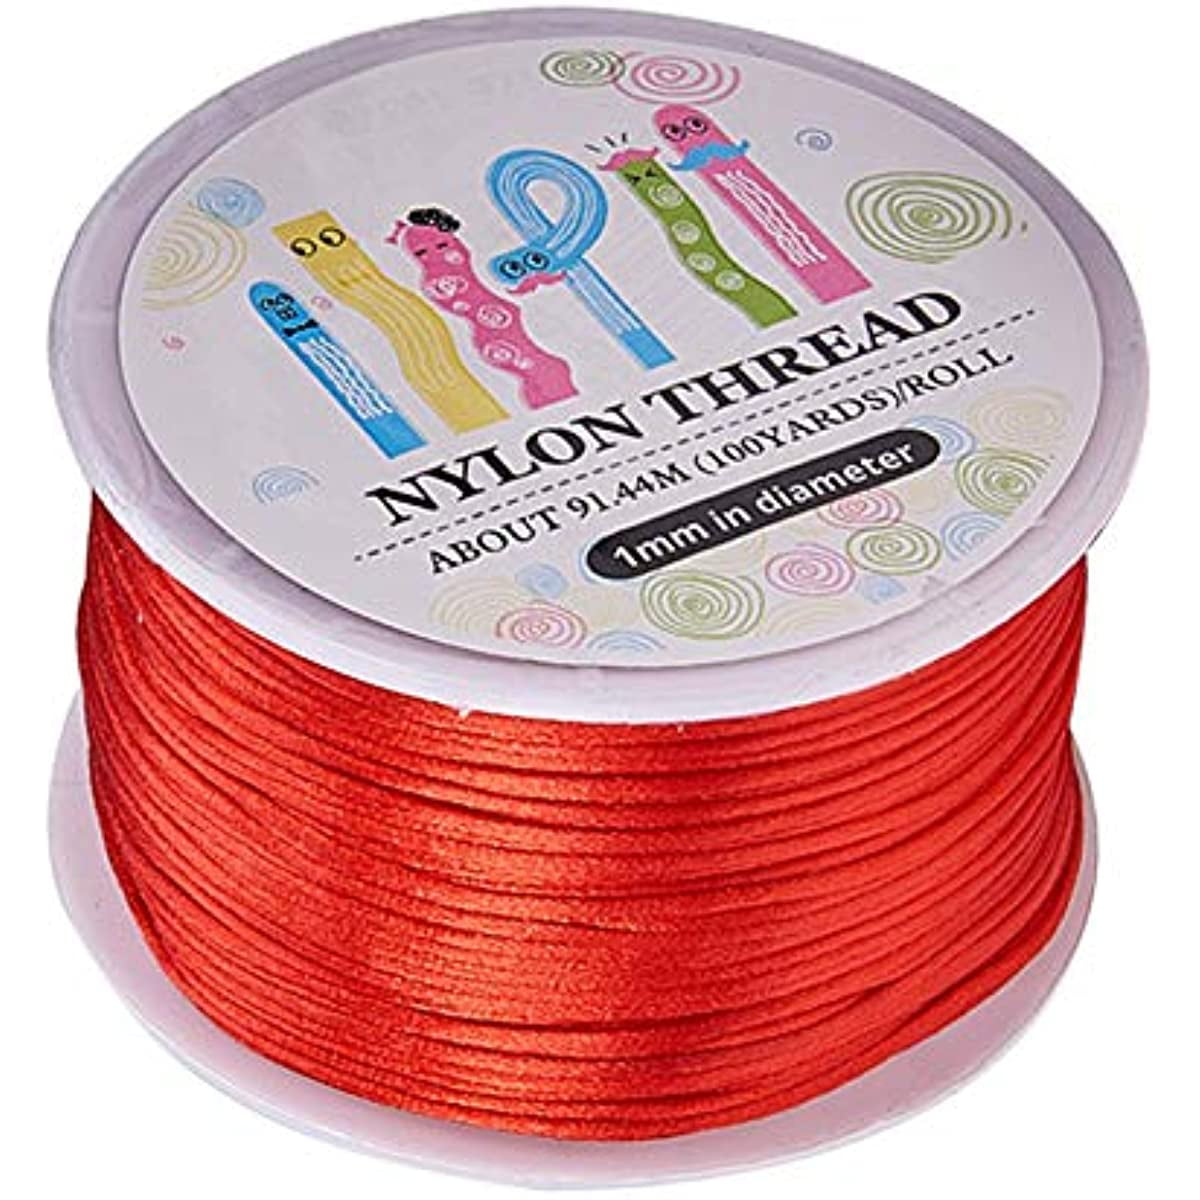 FireLine Braided Beading Thread, 4lb Test Weight and .005 Thick, Black  Satin (50 Yard Spool)